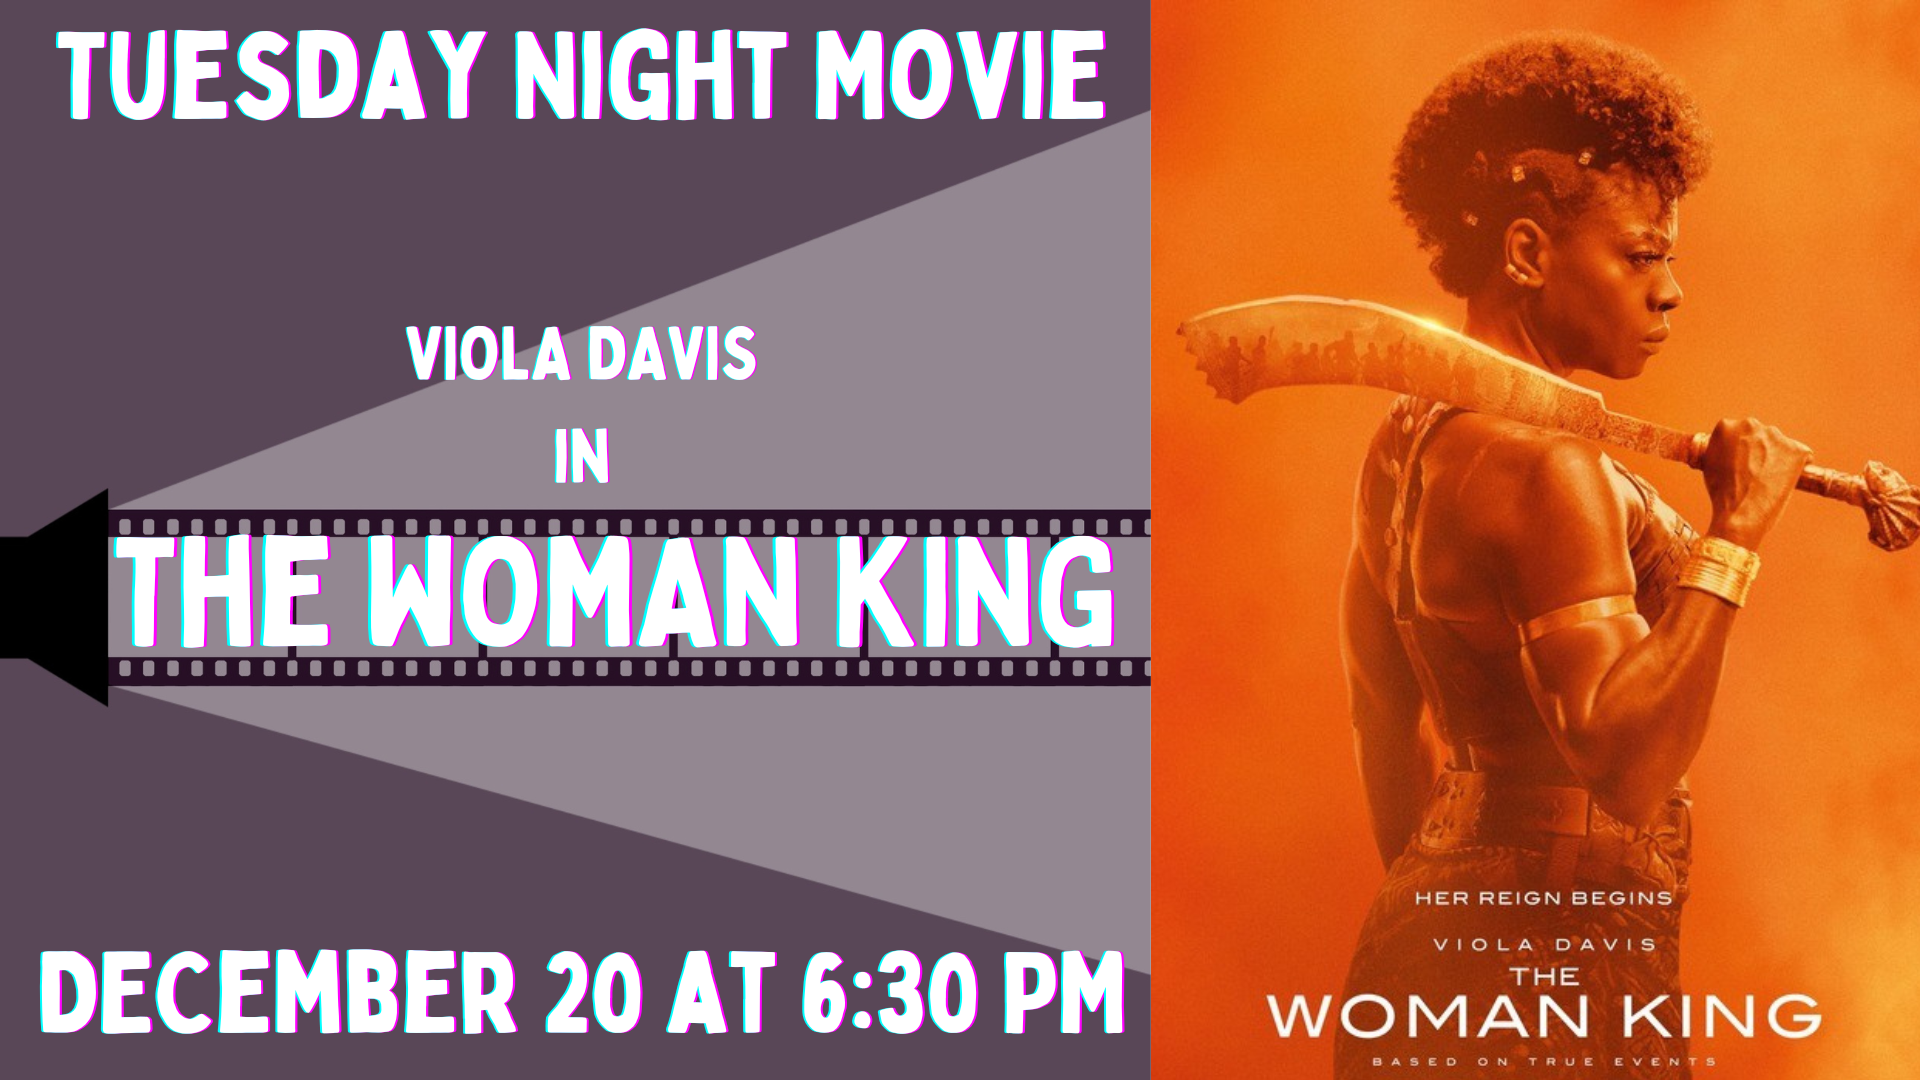 Banner advertising our screening of THE WOMAN KING, December 20 at 6:30 PM